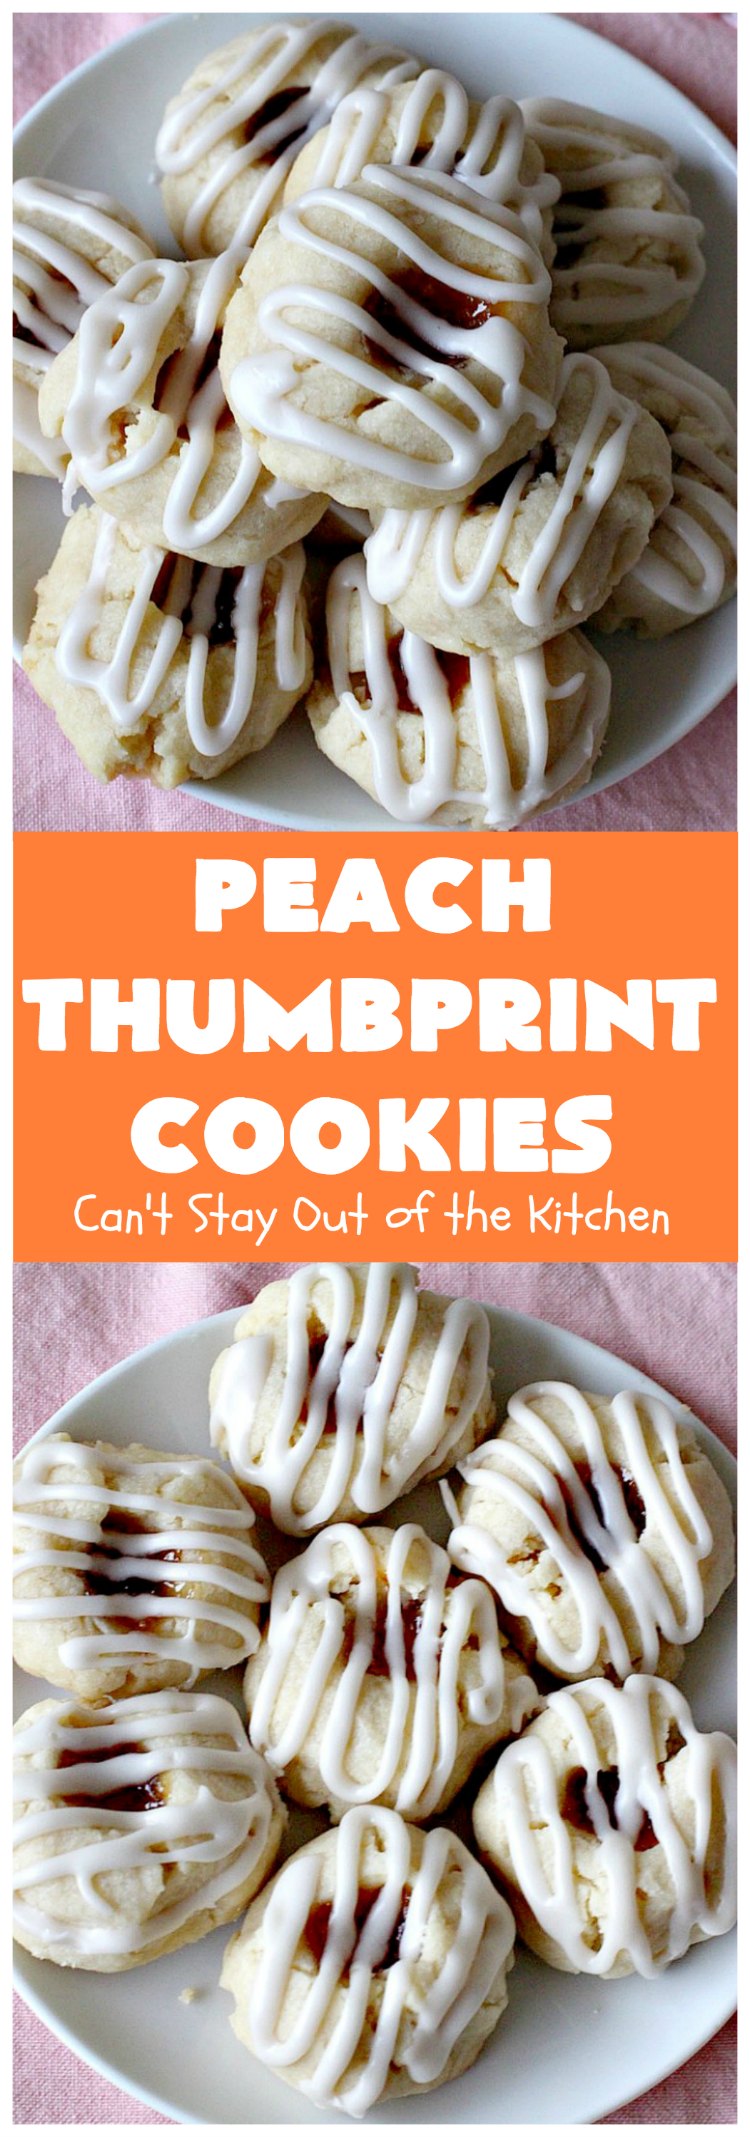 Peach Thumbprint Cookies | Can't Stay Out of the Kitchen